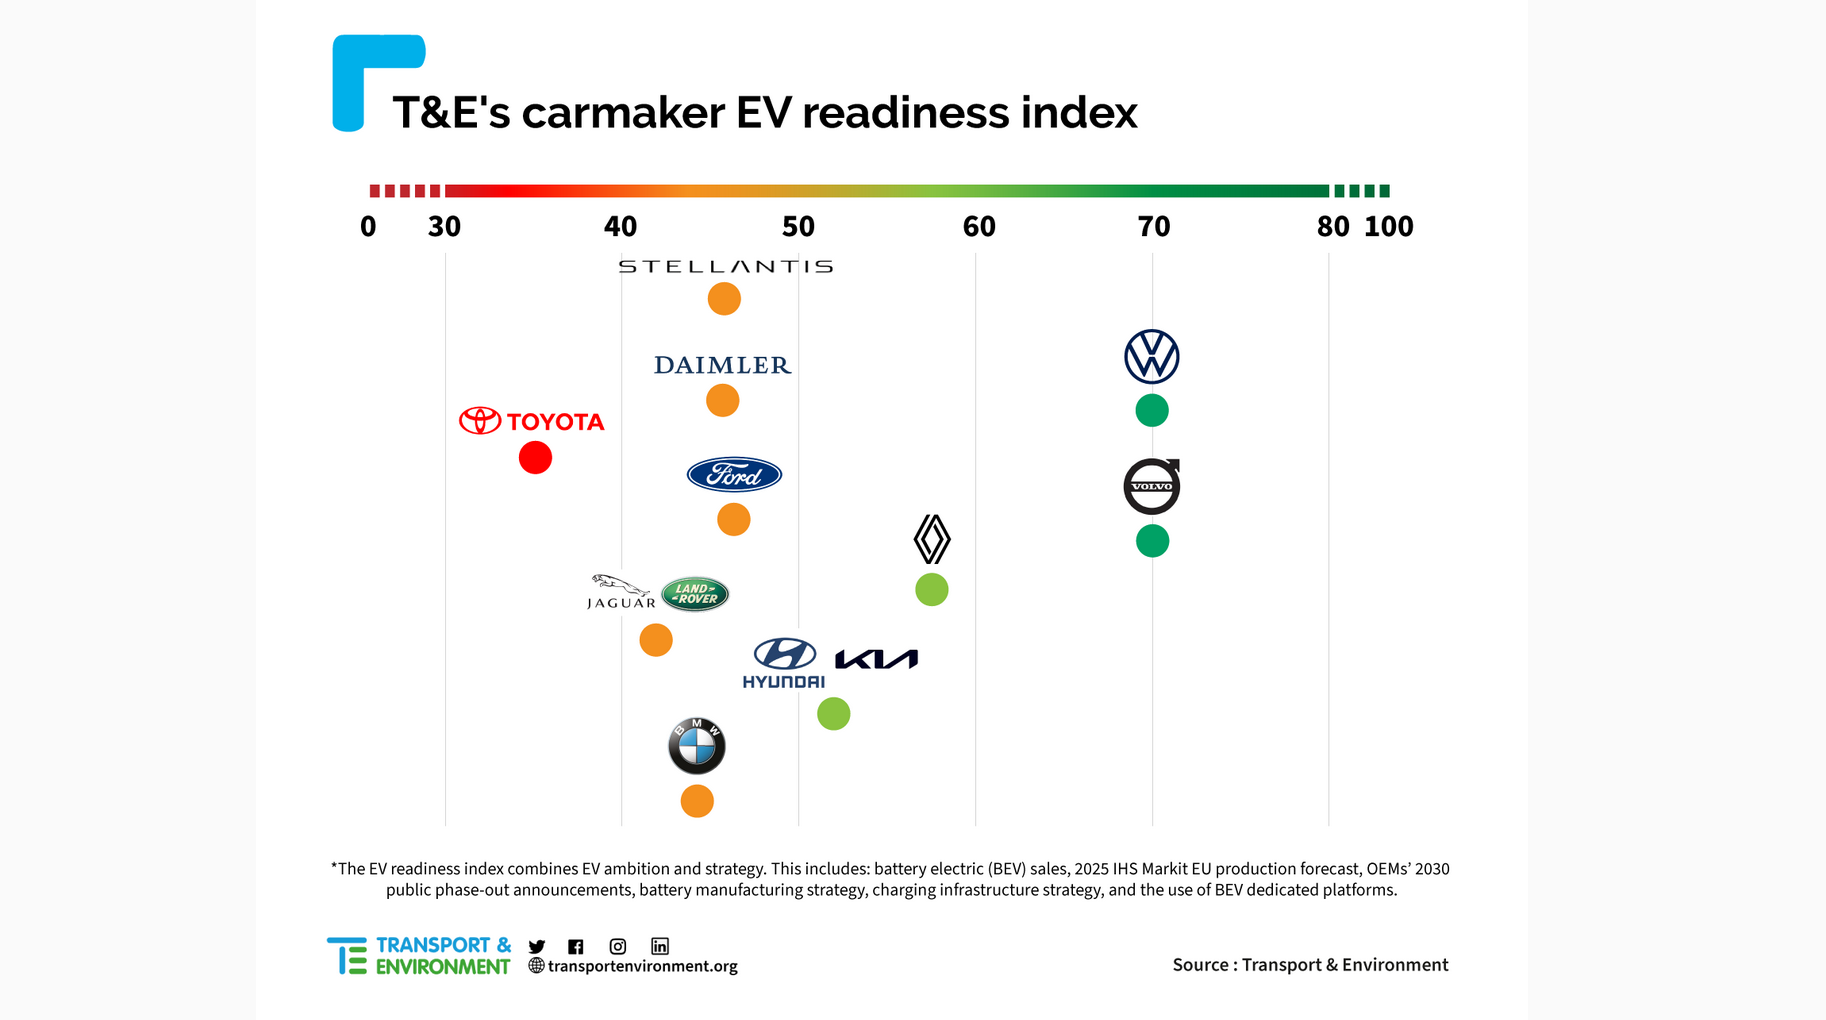 T&E: Only Volvo and VW on time in electrification journey